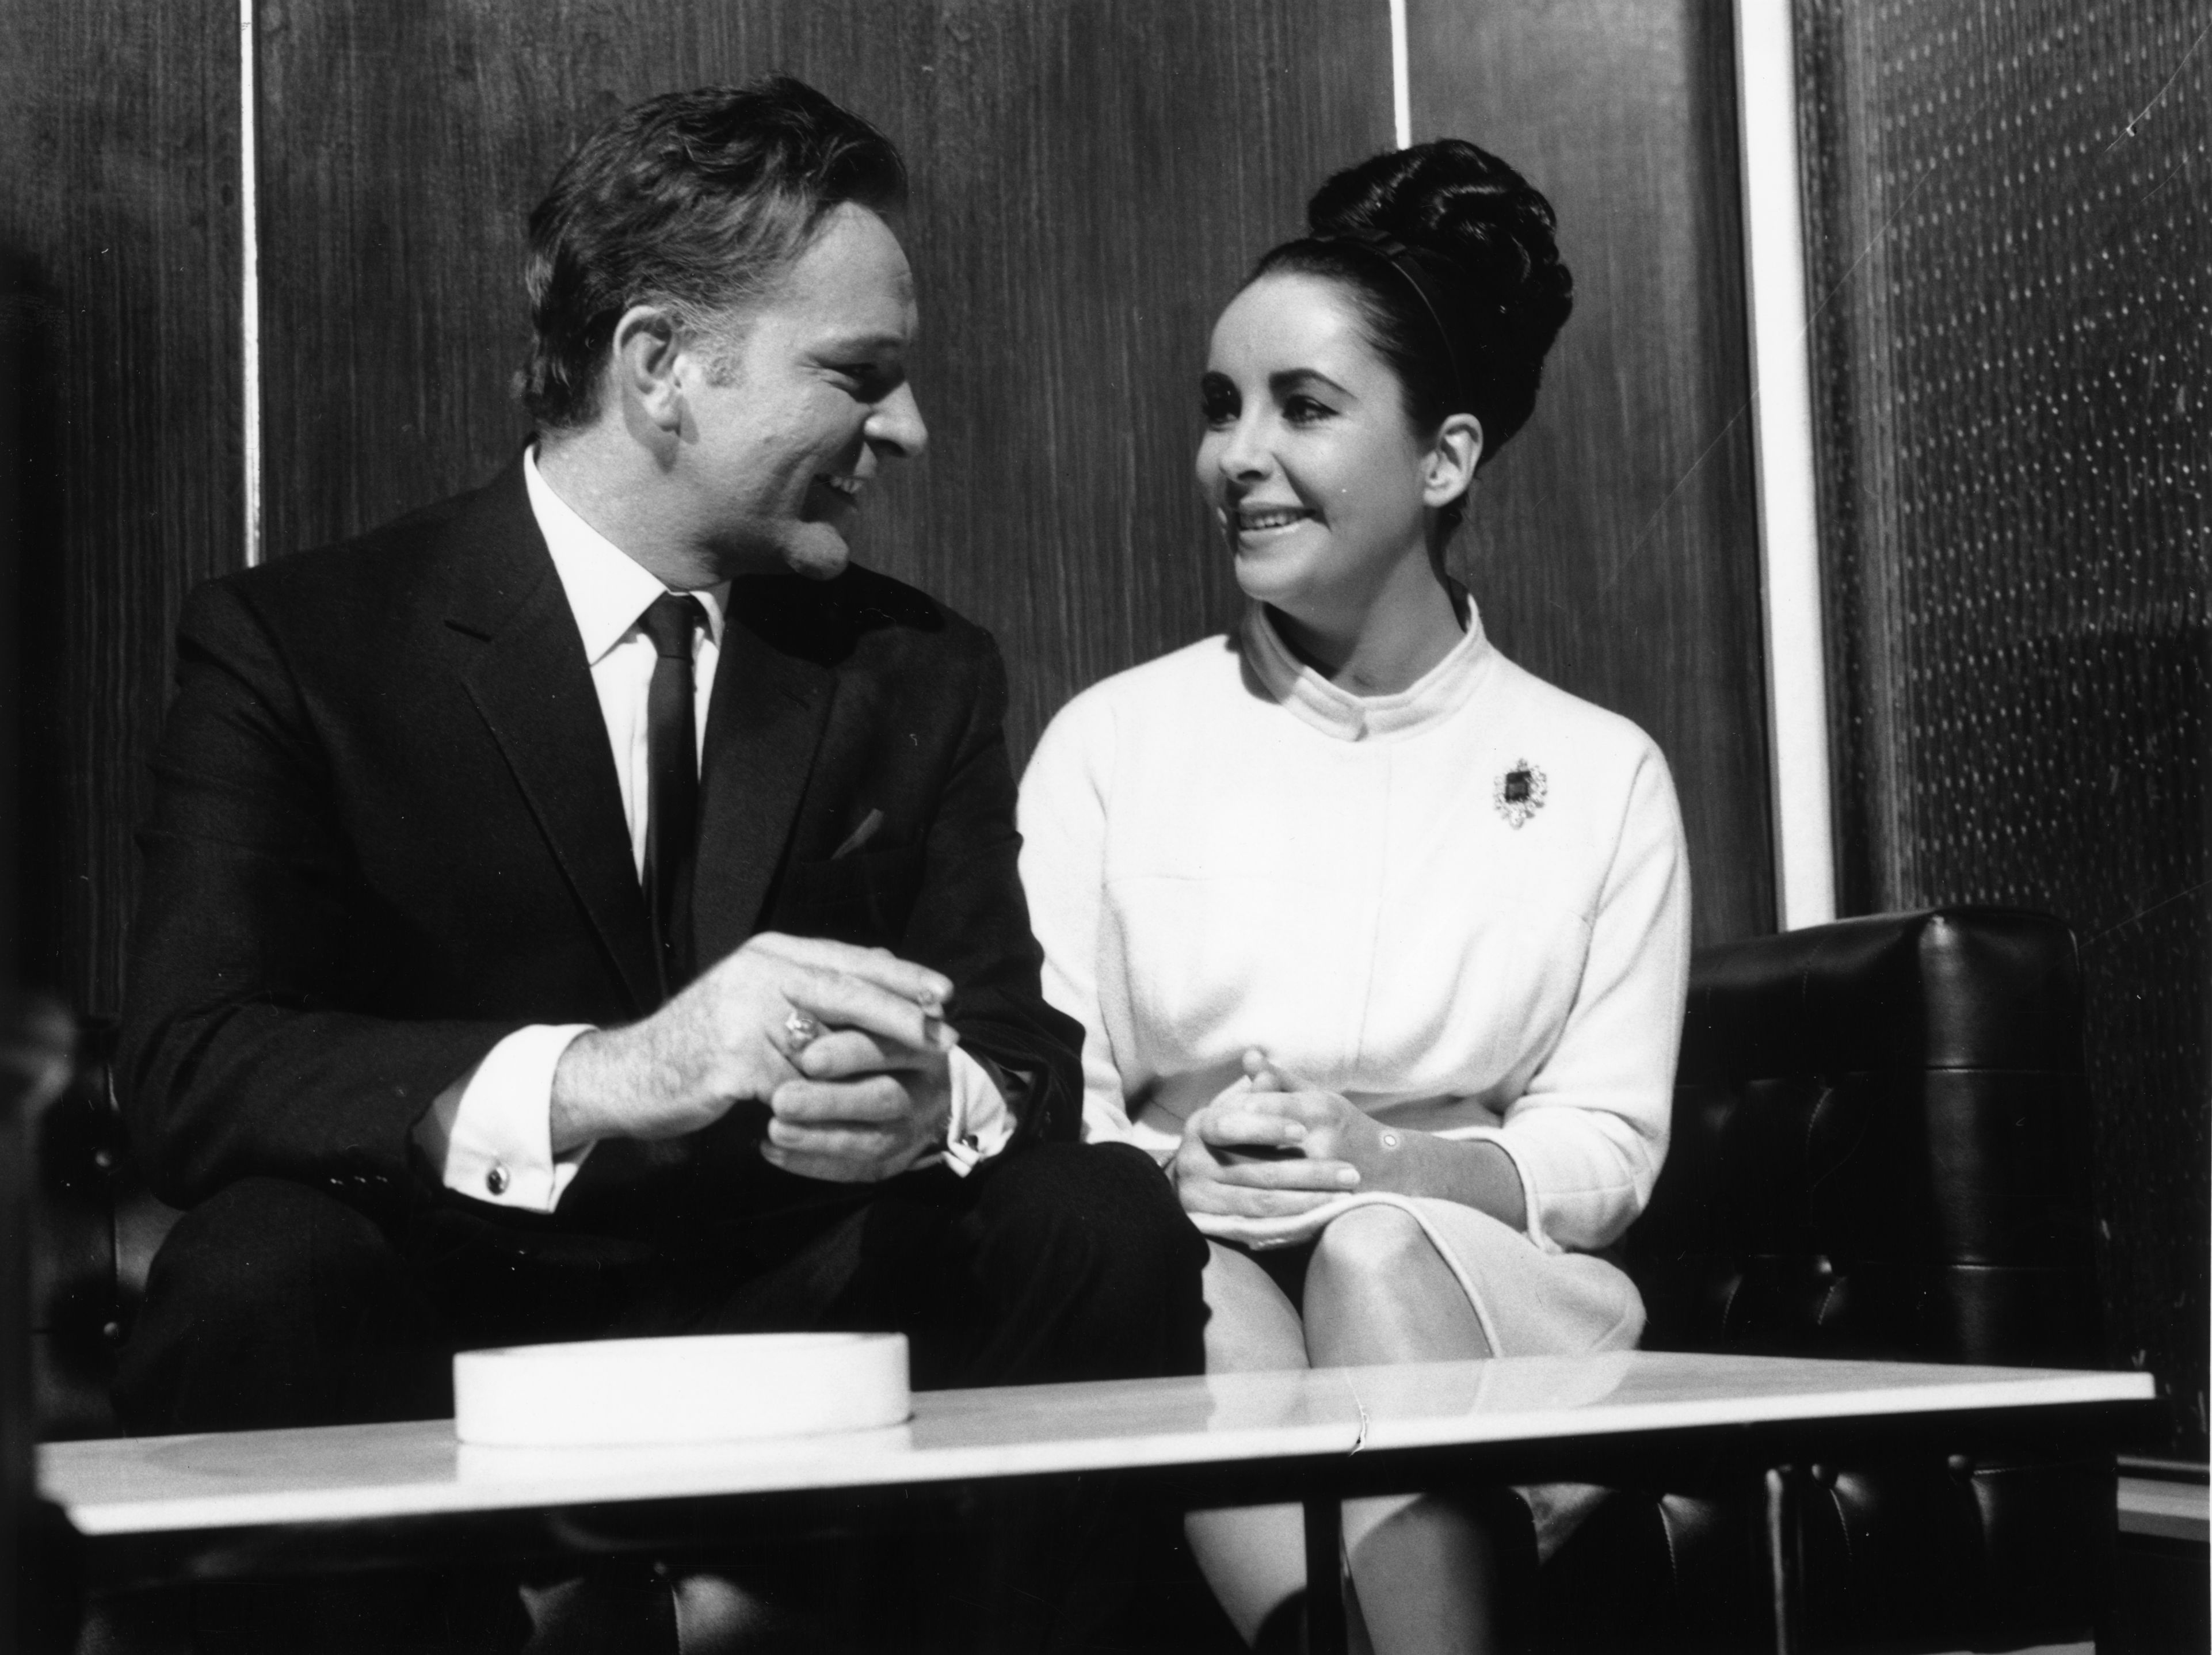 Richard Burton and Elizabeth Taylor are seen in London filming 'The VIPs' in 1962